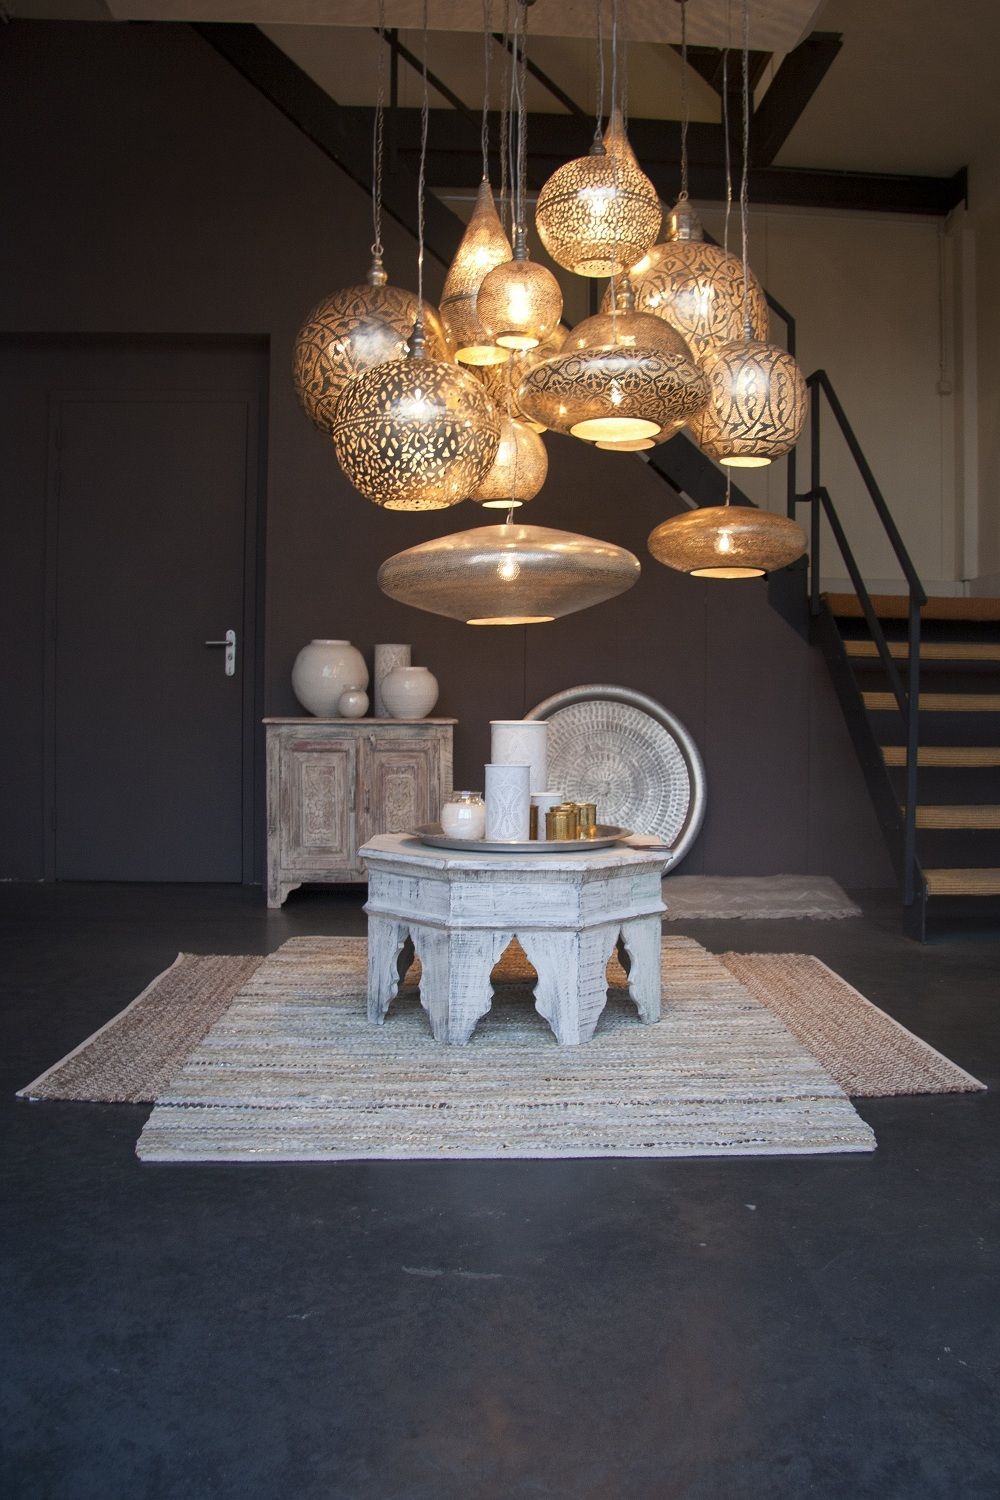 This impressive image shows a selection of the pendant lights, furniture and rugs from Zenza.